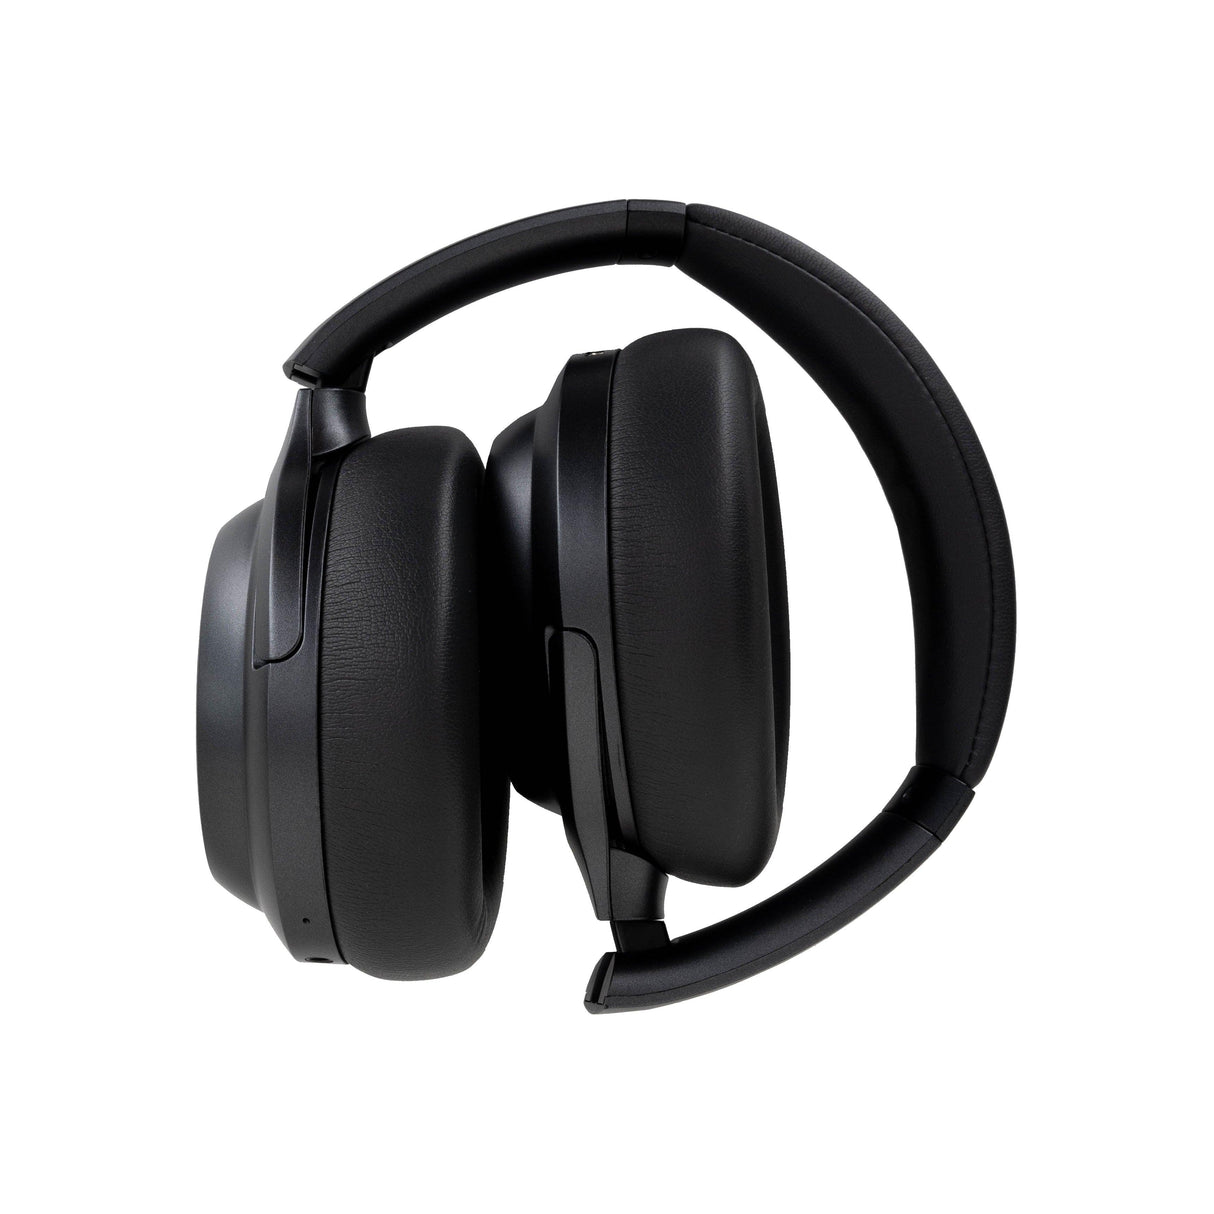 OUR PURE PLANET Our Pure Planet Signature Bluetooth Headphones (OPP137) OUR PURE PLANET